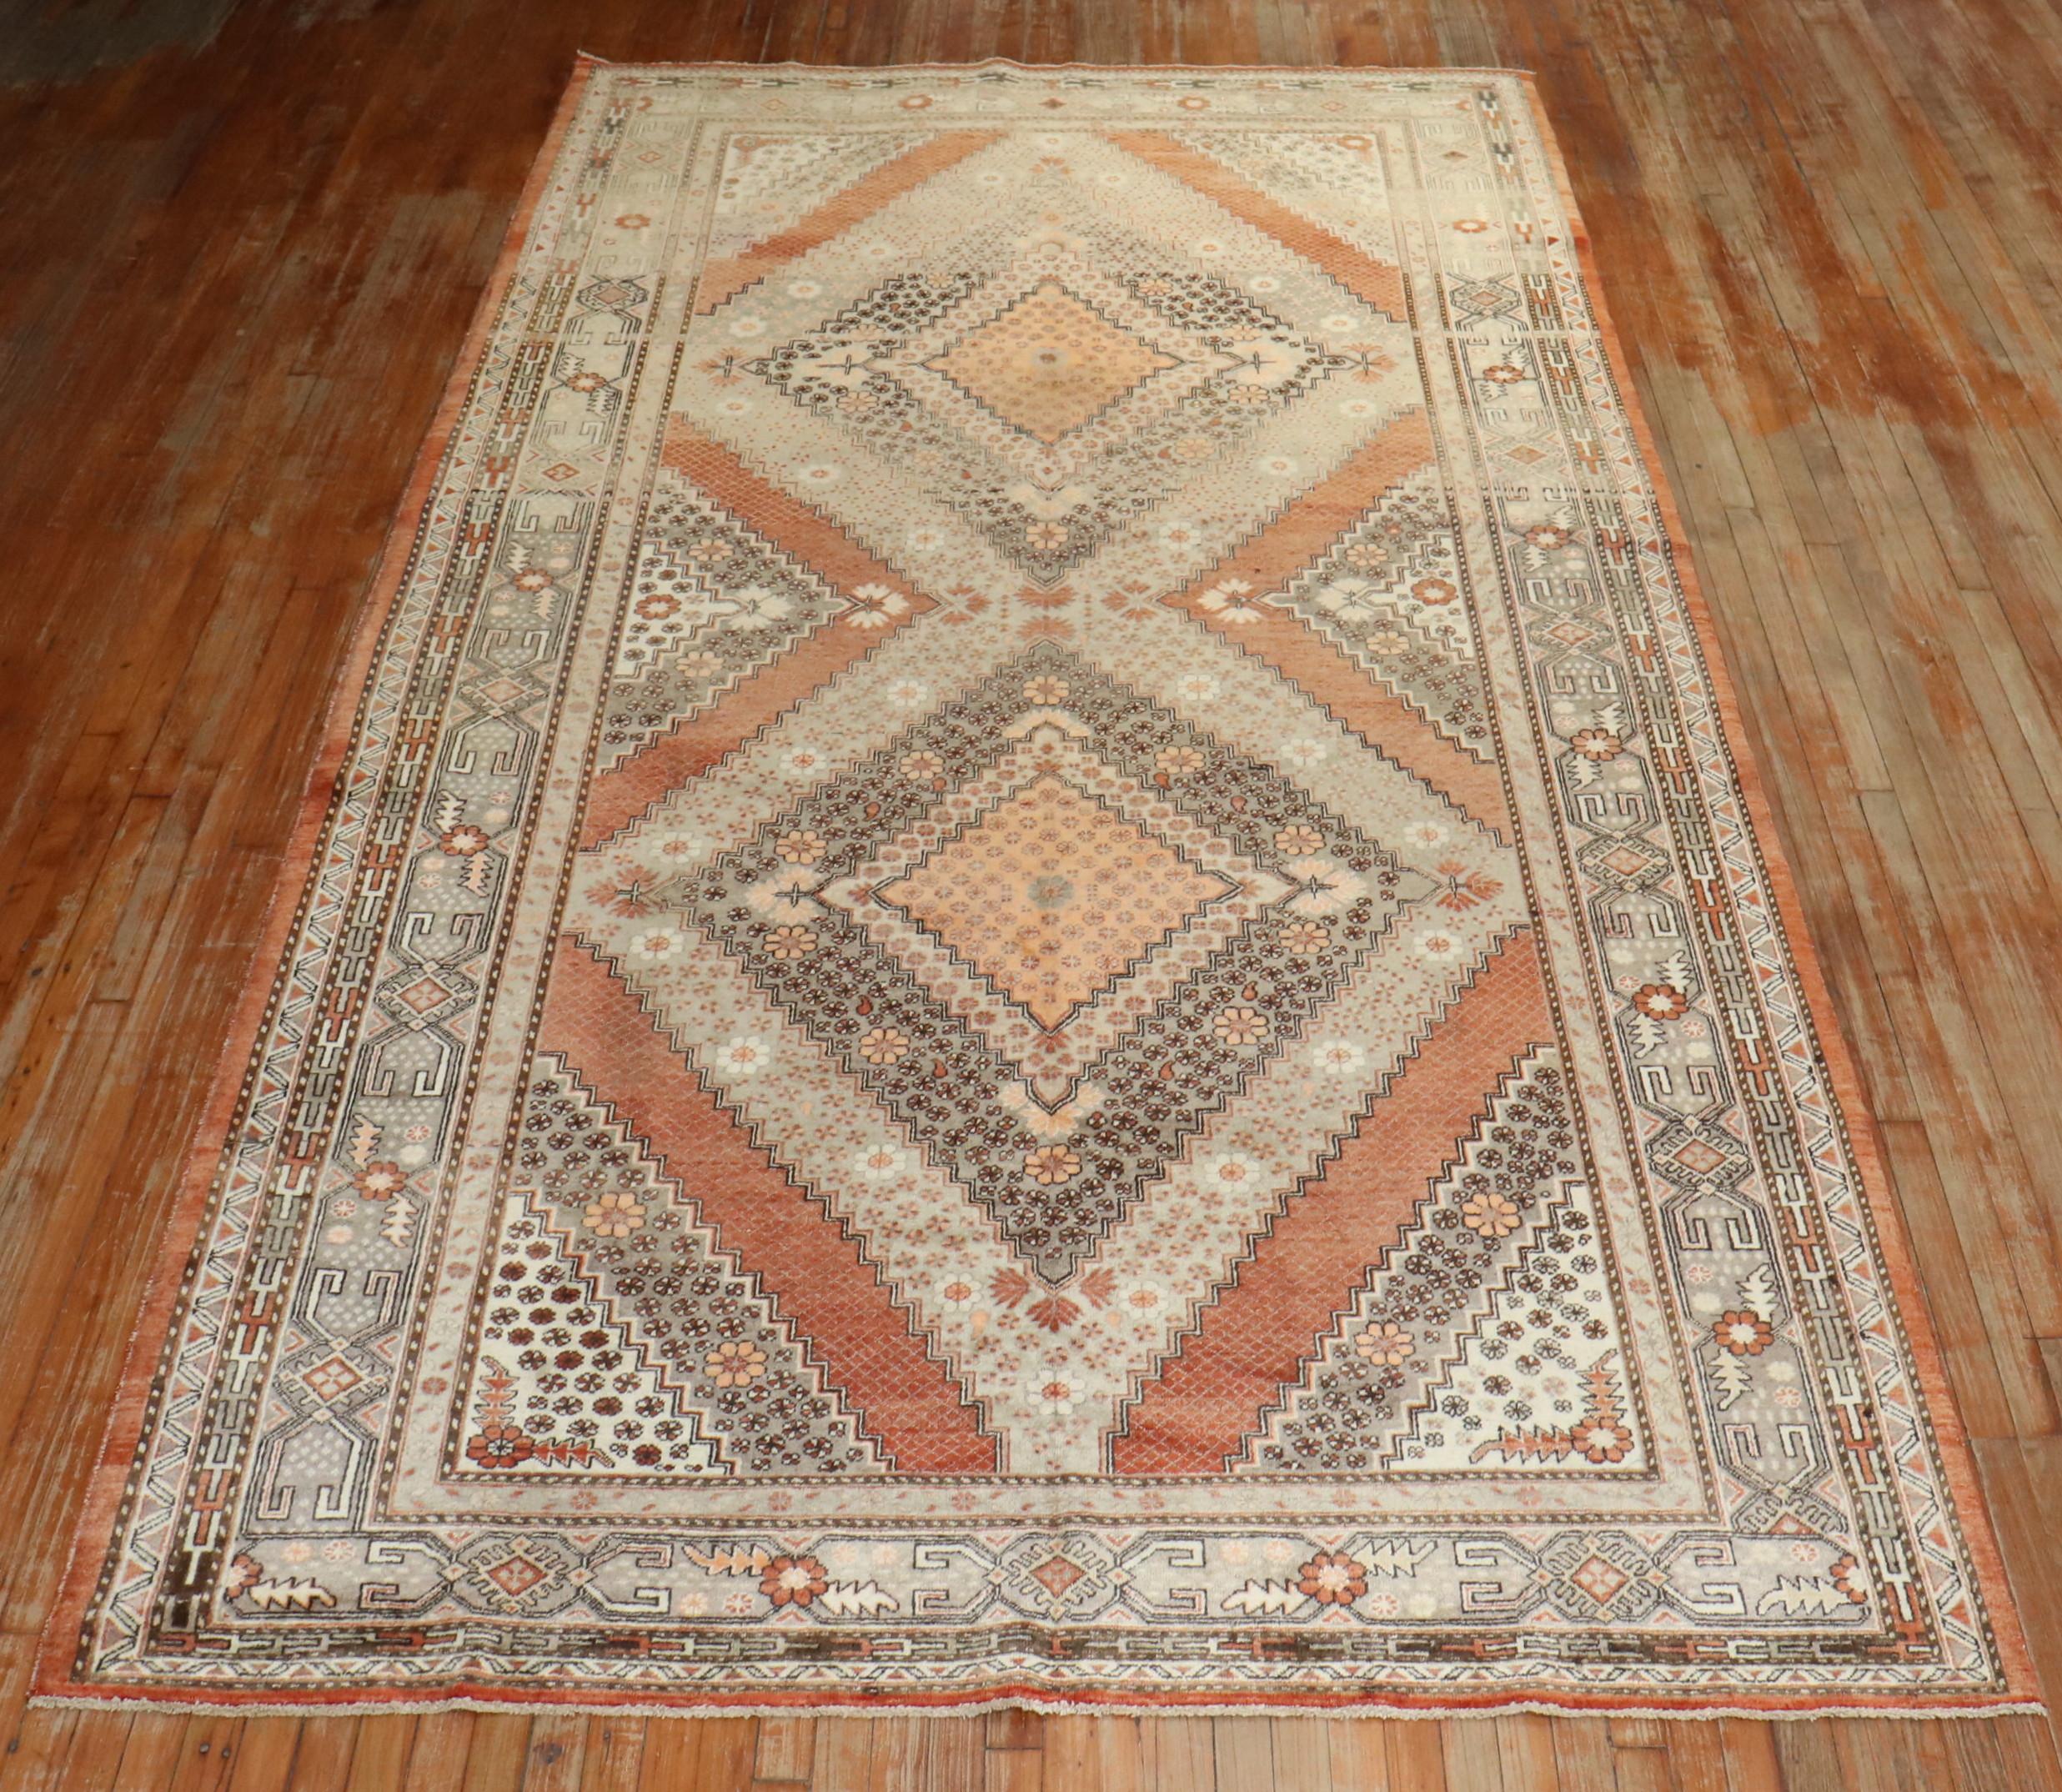 20th century one of a kind gallery size Khotan rug with 2 large medallions on an apricot color ground, dominant accents in orange and gray,

measures: 7 x 13'6